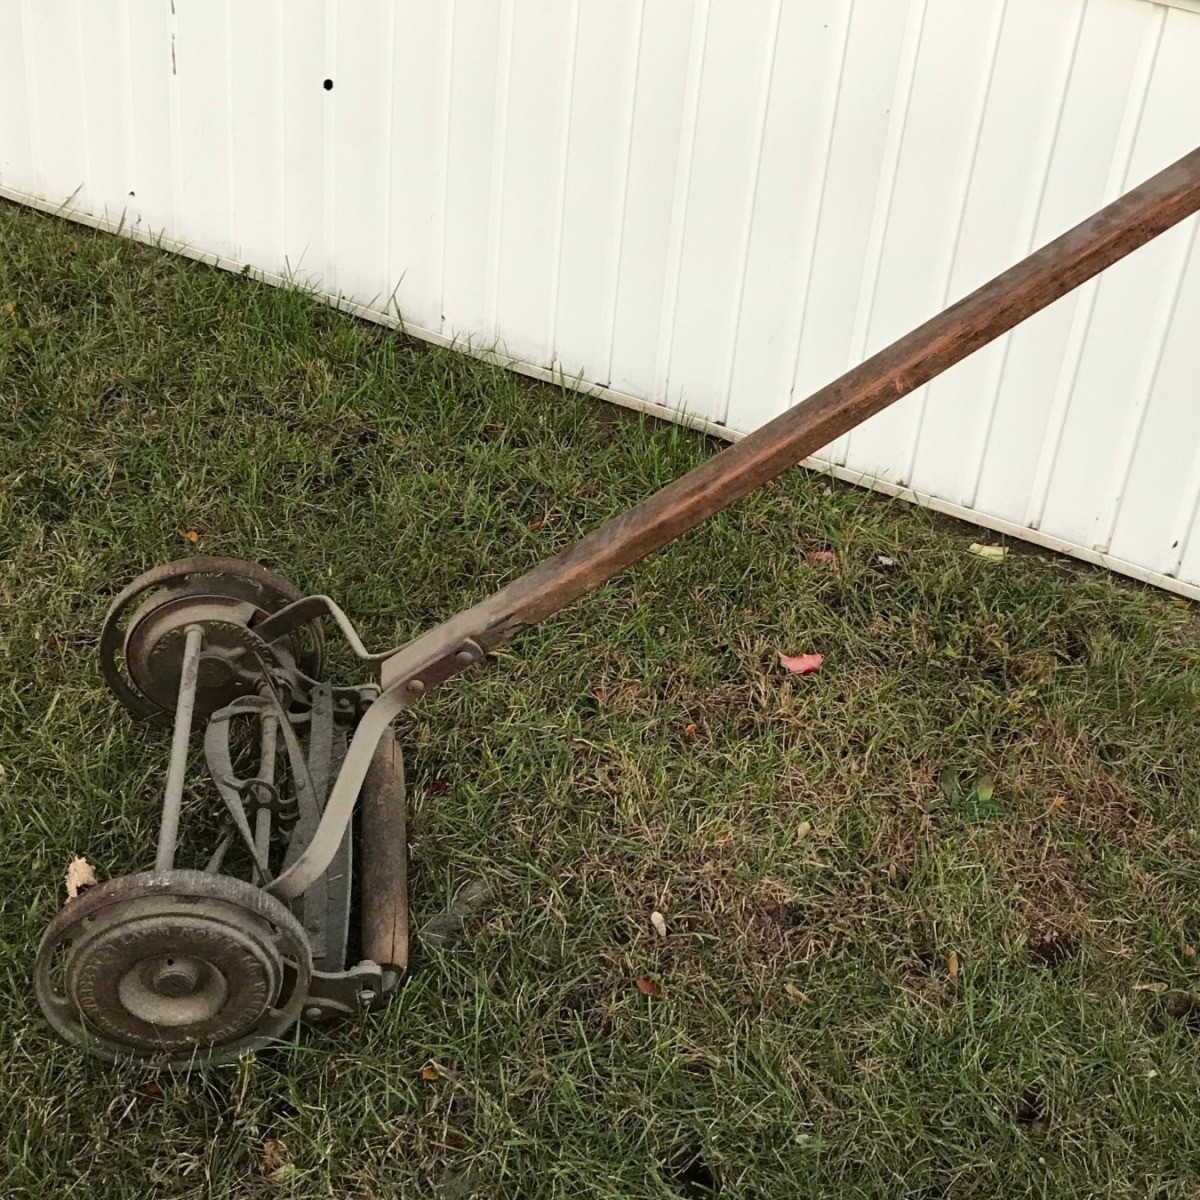 Value of a Worcester Reel Lawn Mower?